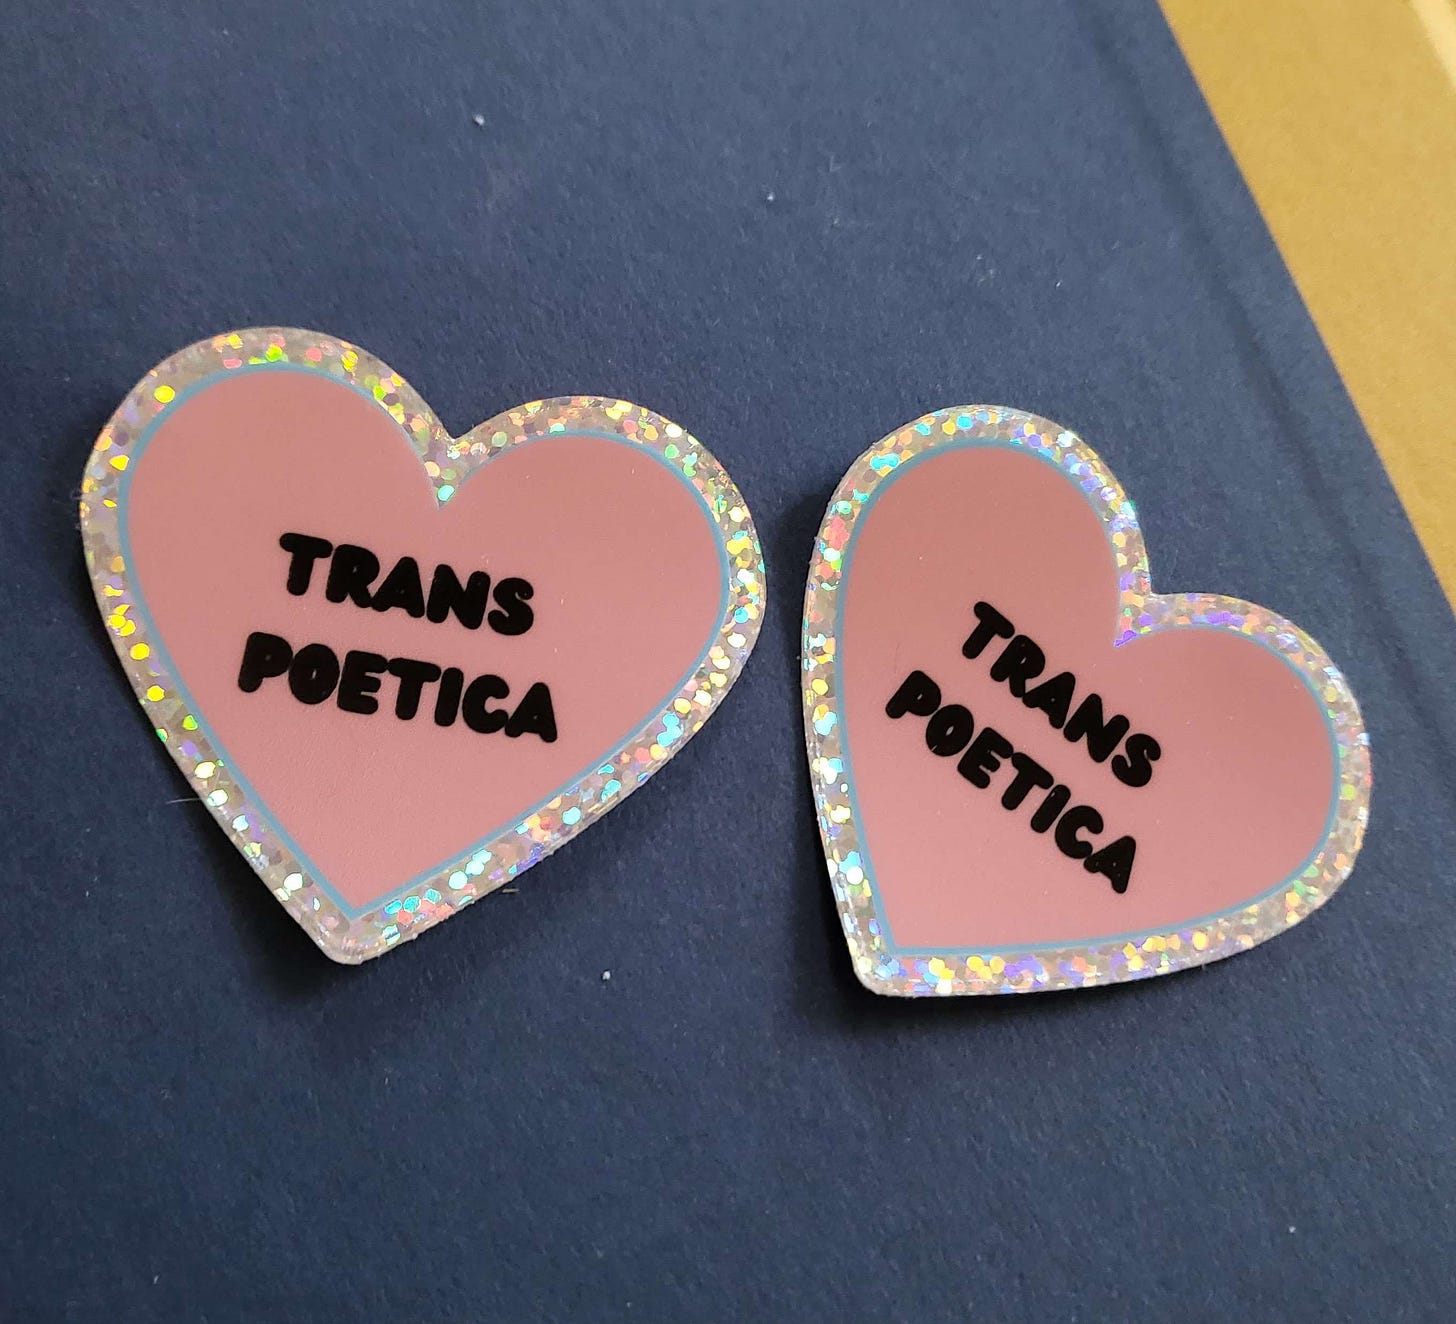 two heart shaped stickers. they are pink in the middle and say TRANS POETICA in bubble letters. there is a blue outline, and a glittery outline of the heart